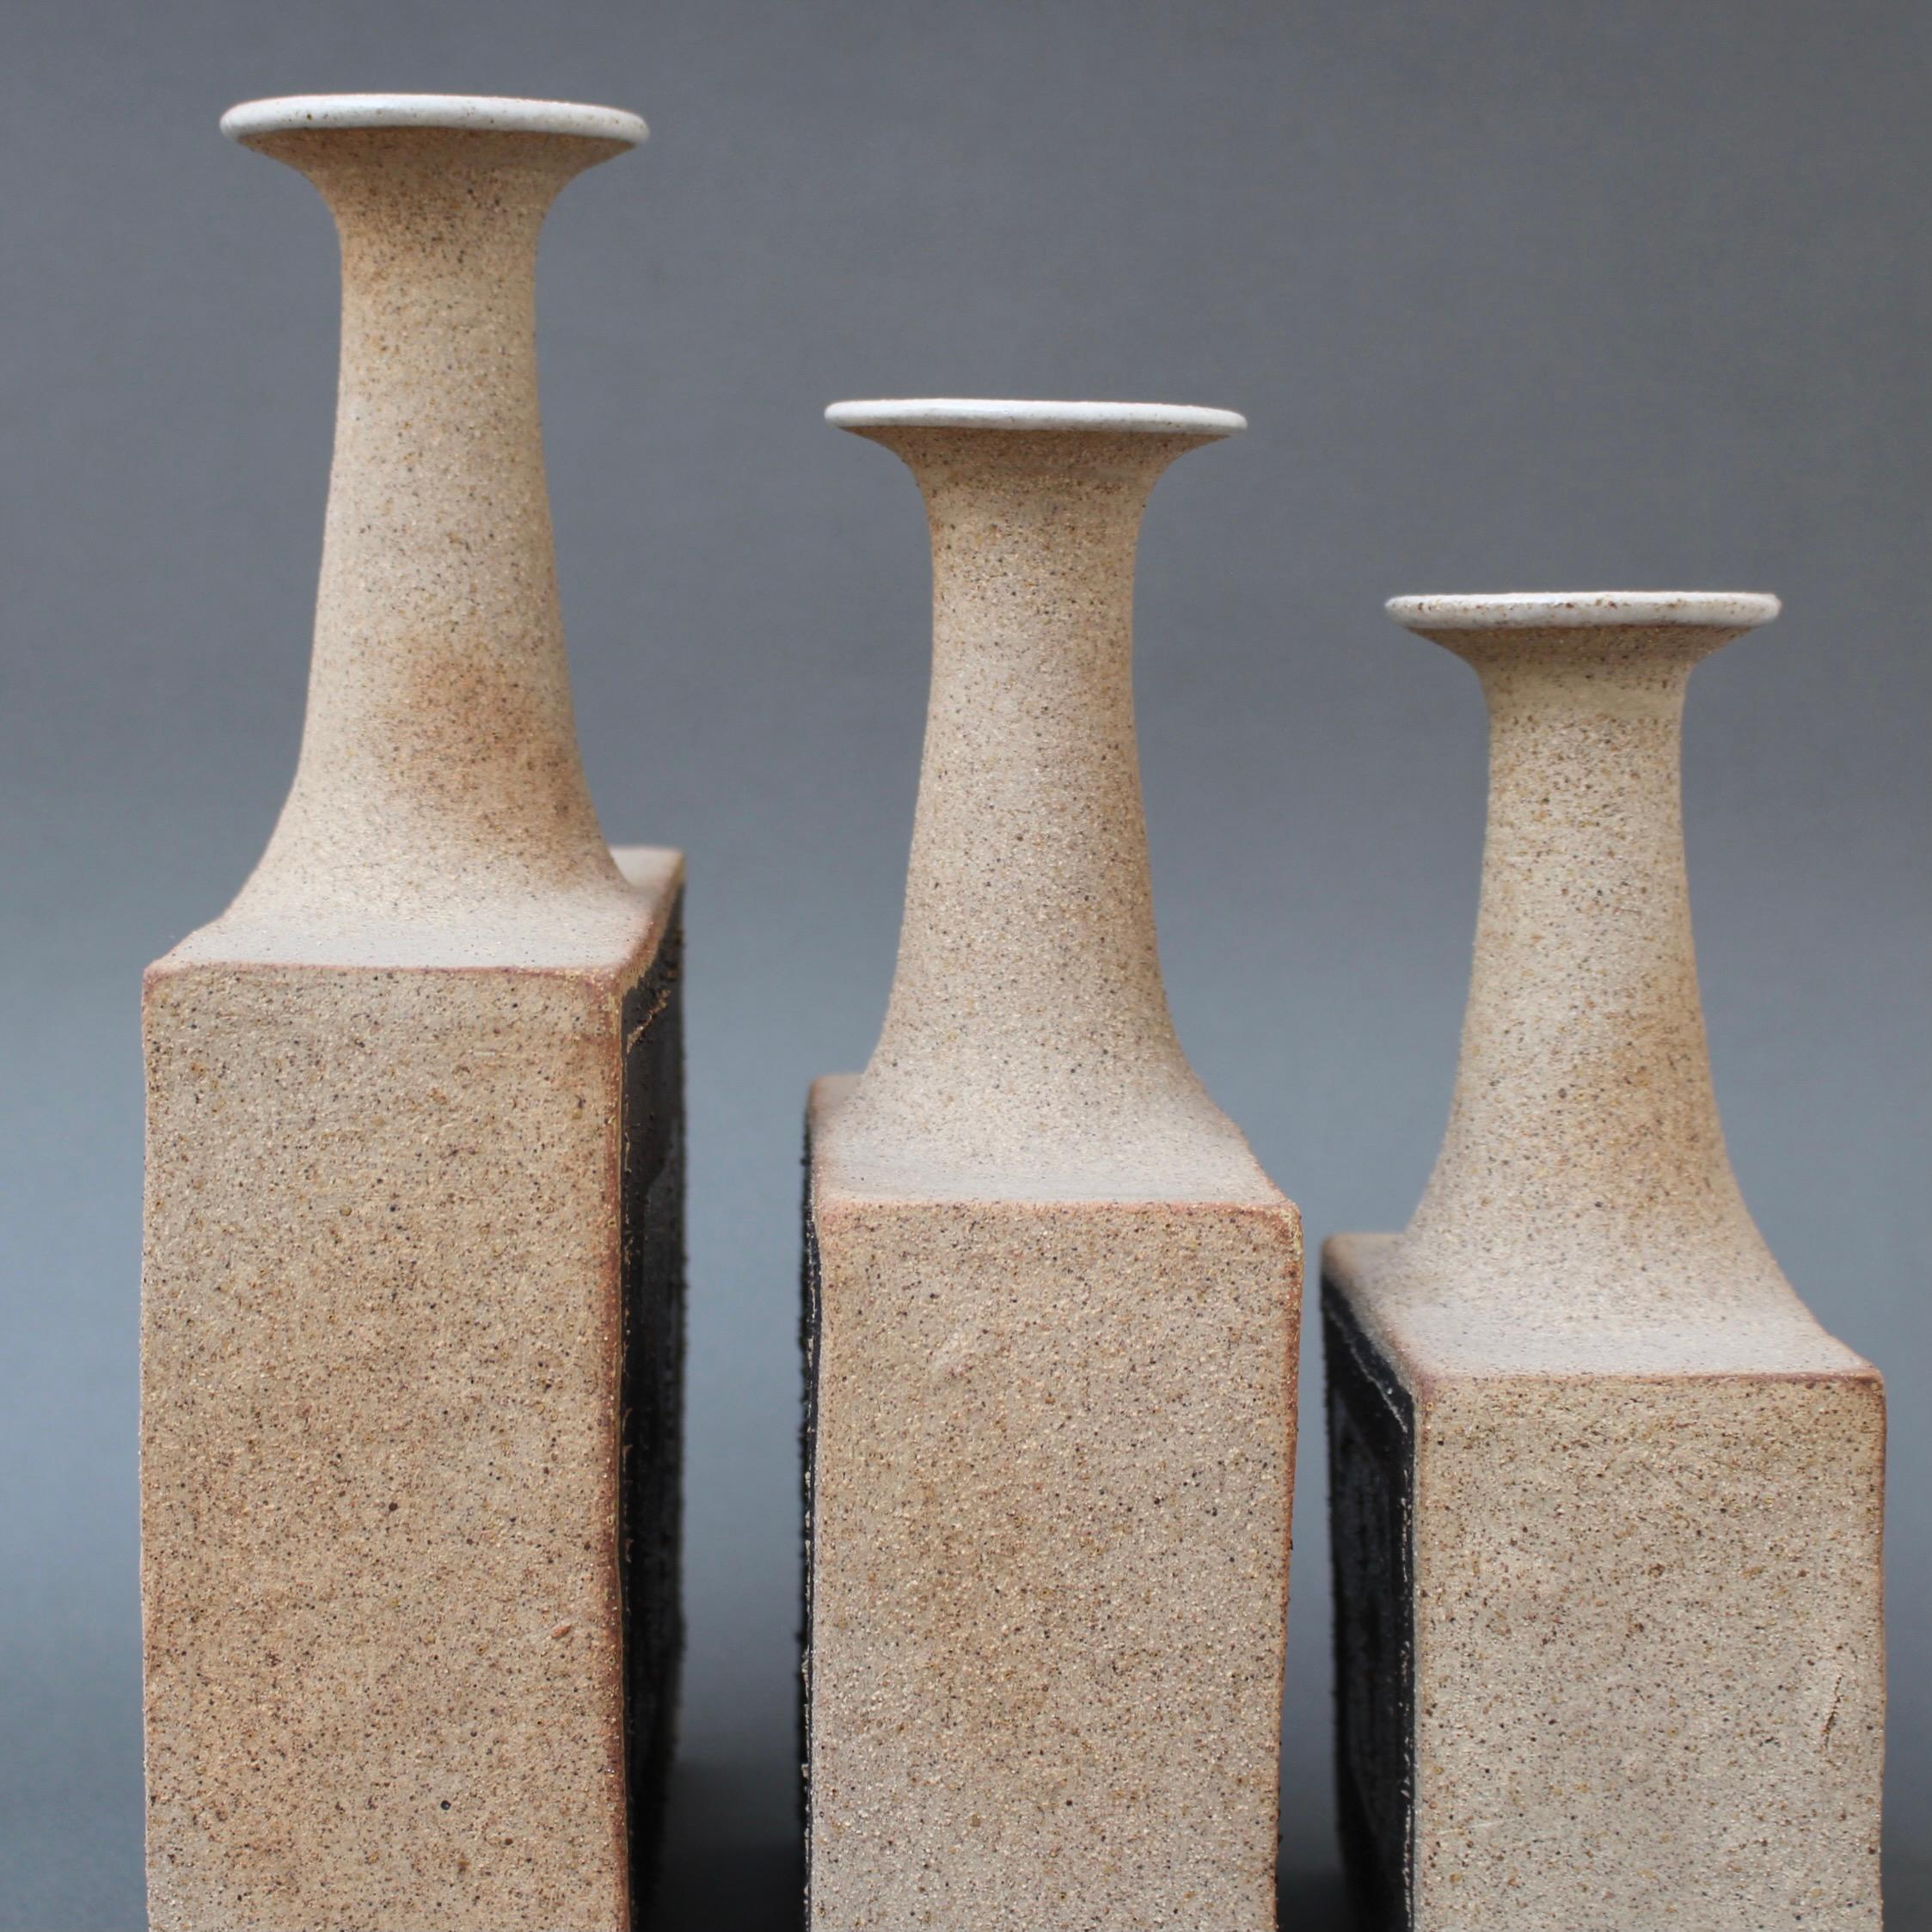 Trio of Italian Stoneware Vases with Abstract Motif by Bruno Gambone, c. 1990s For Sale 1